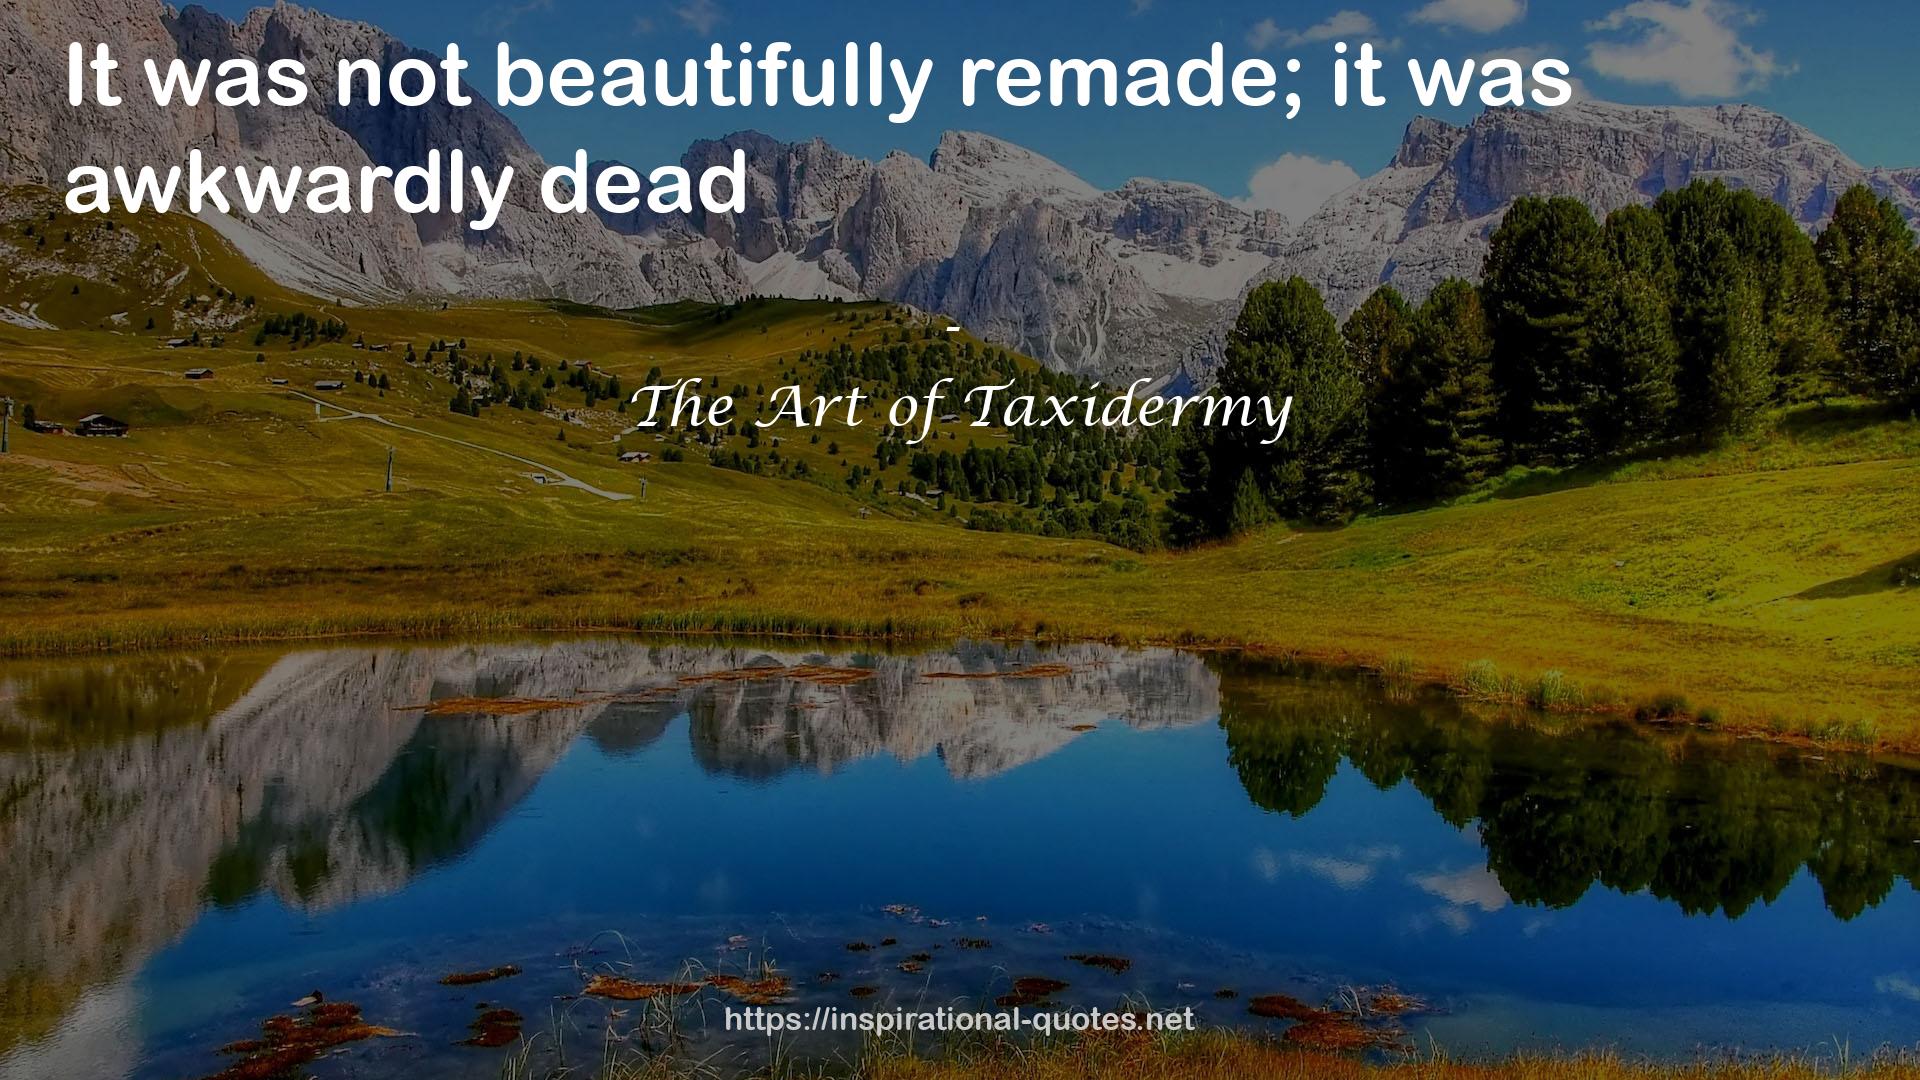 The Art of Taxidermy QUOTES